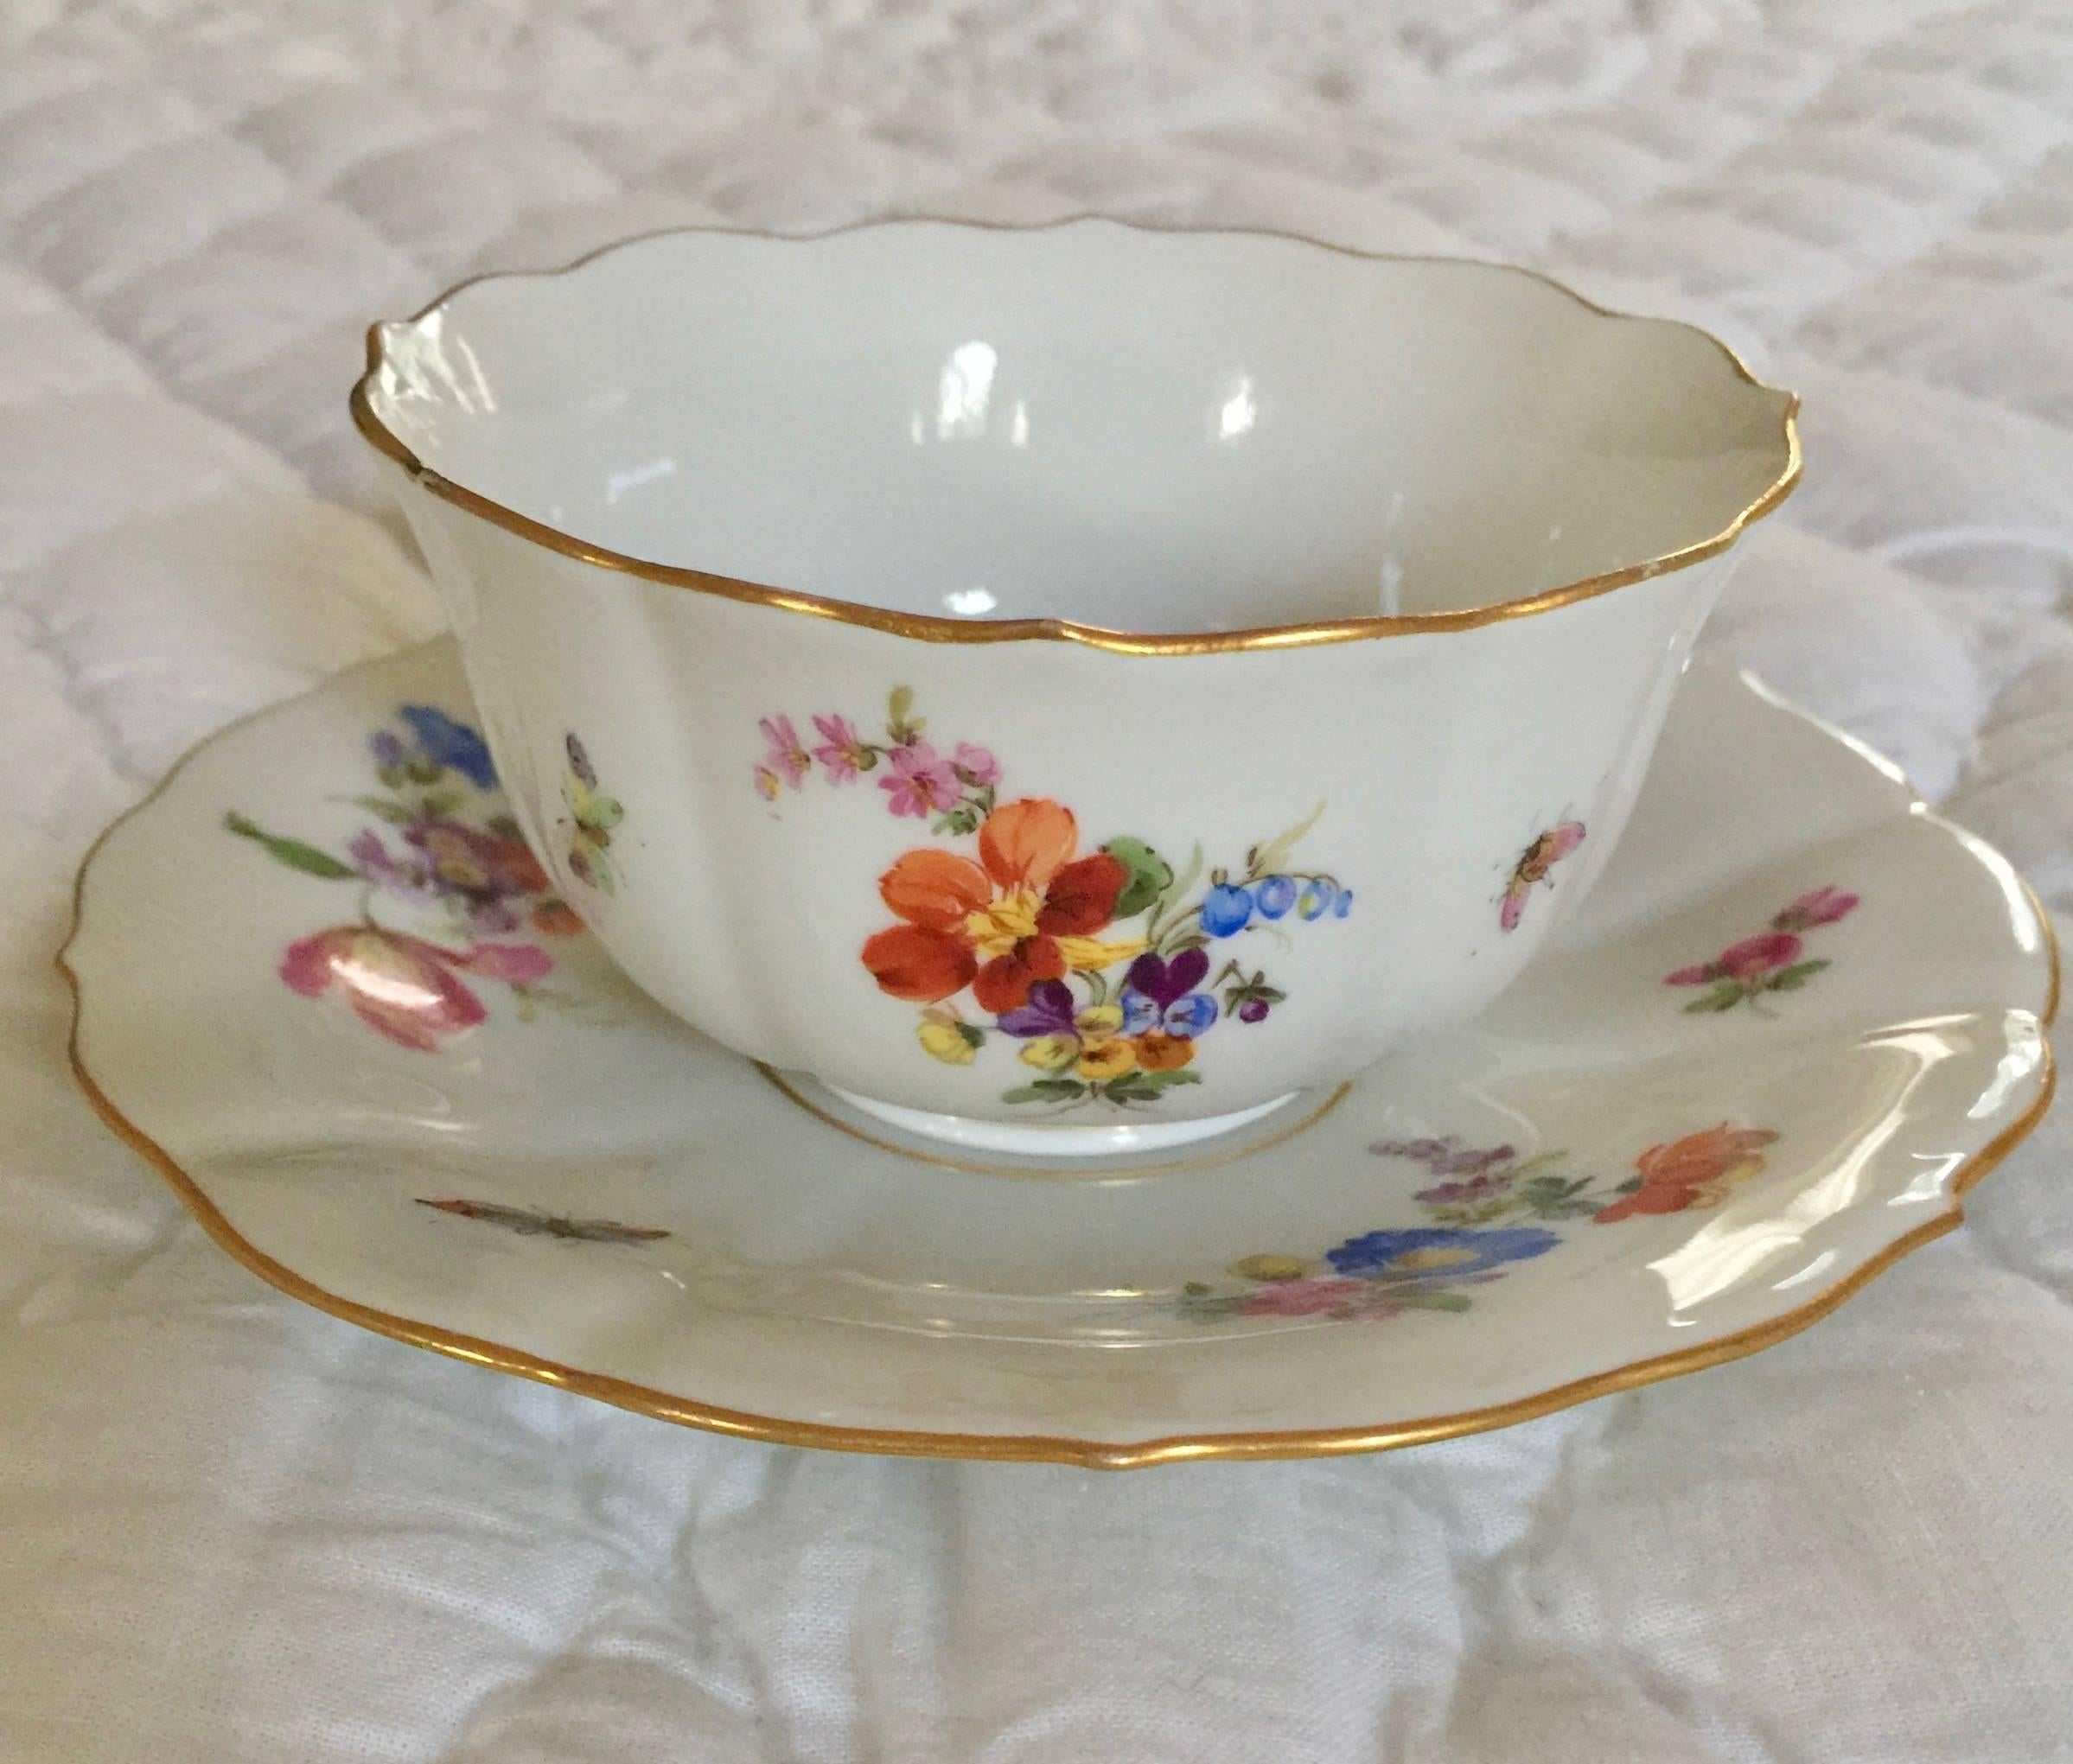 19th century Meissen porcelain painted gilt cup and saucer
Painted with flowers butterfly and insect
Cup measures 4